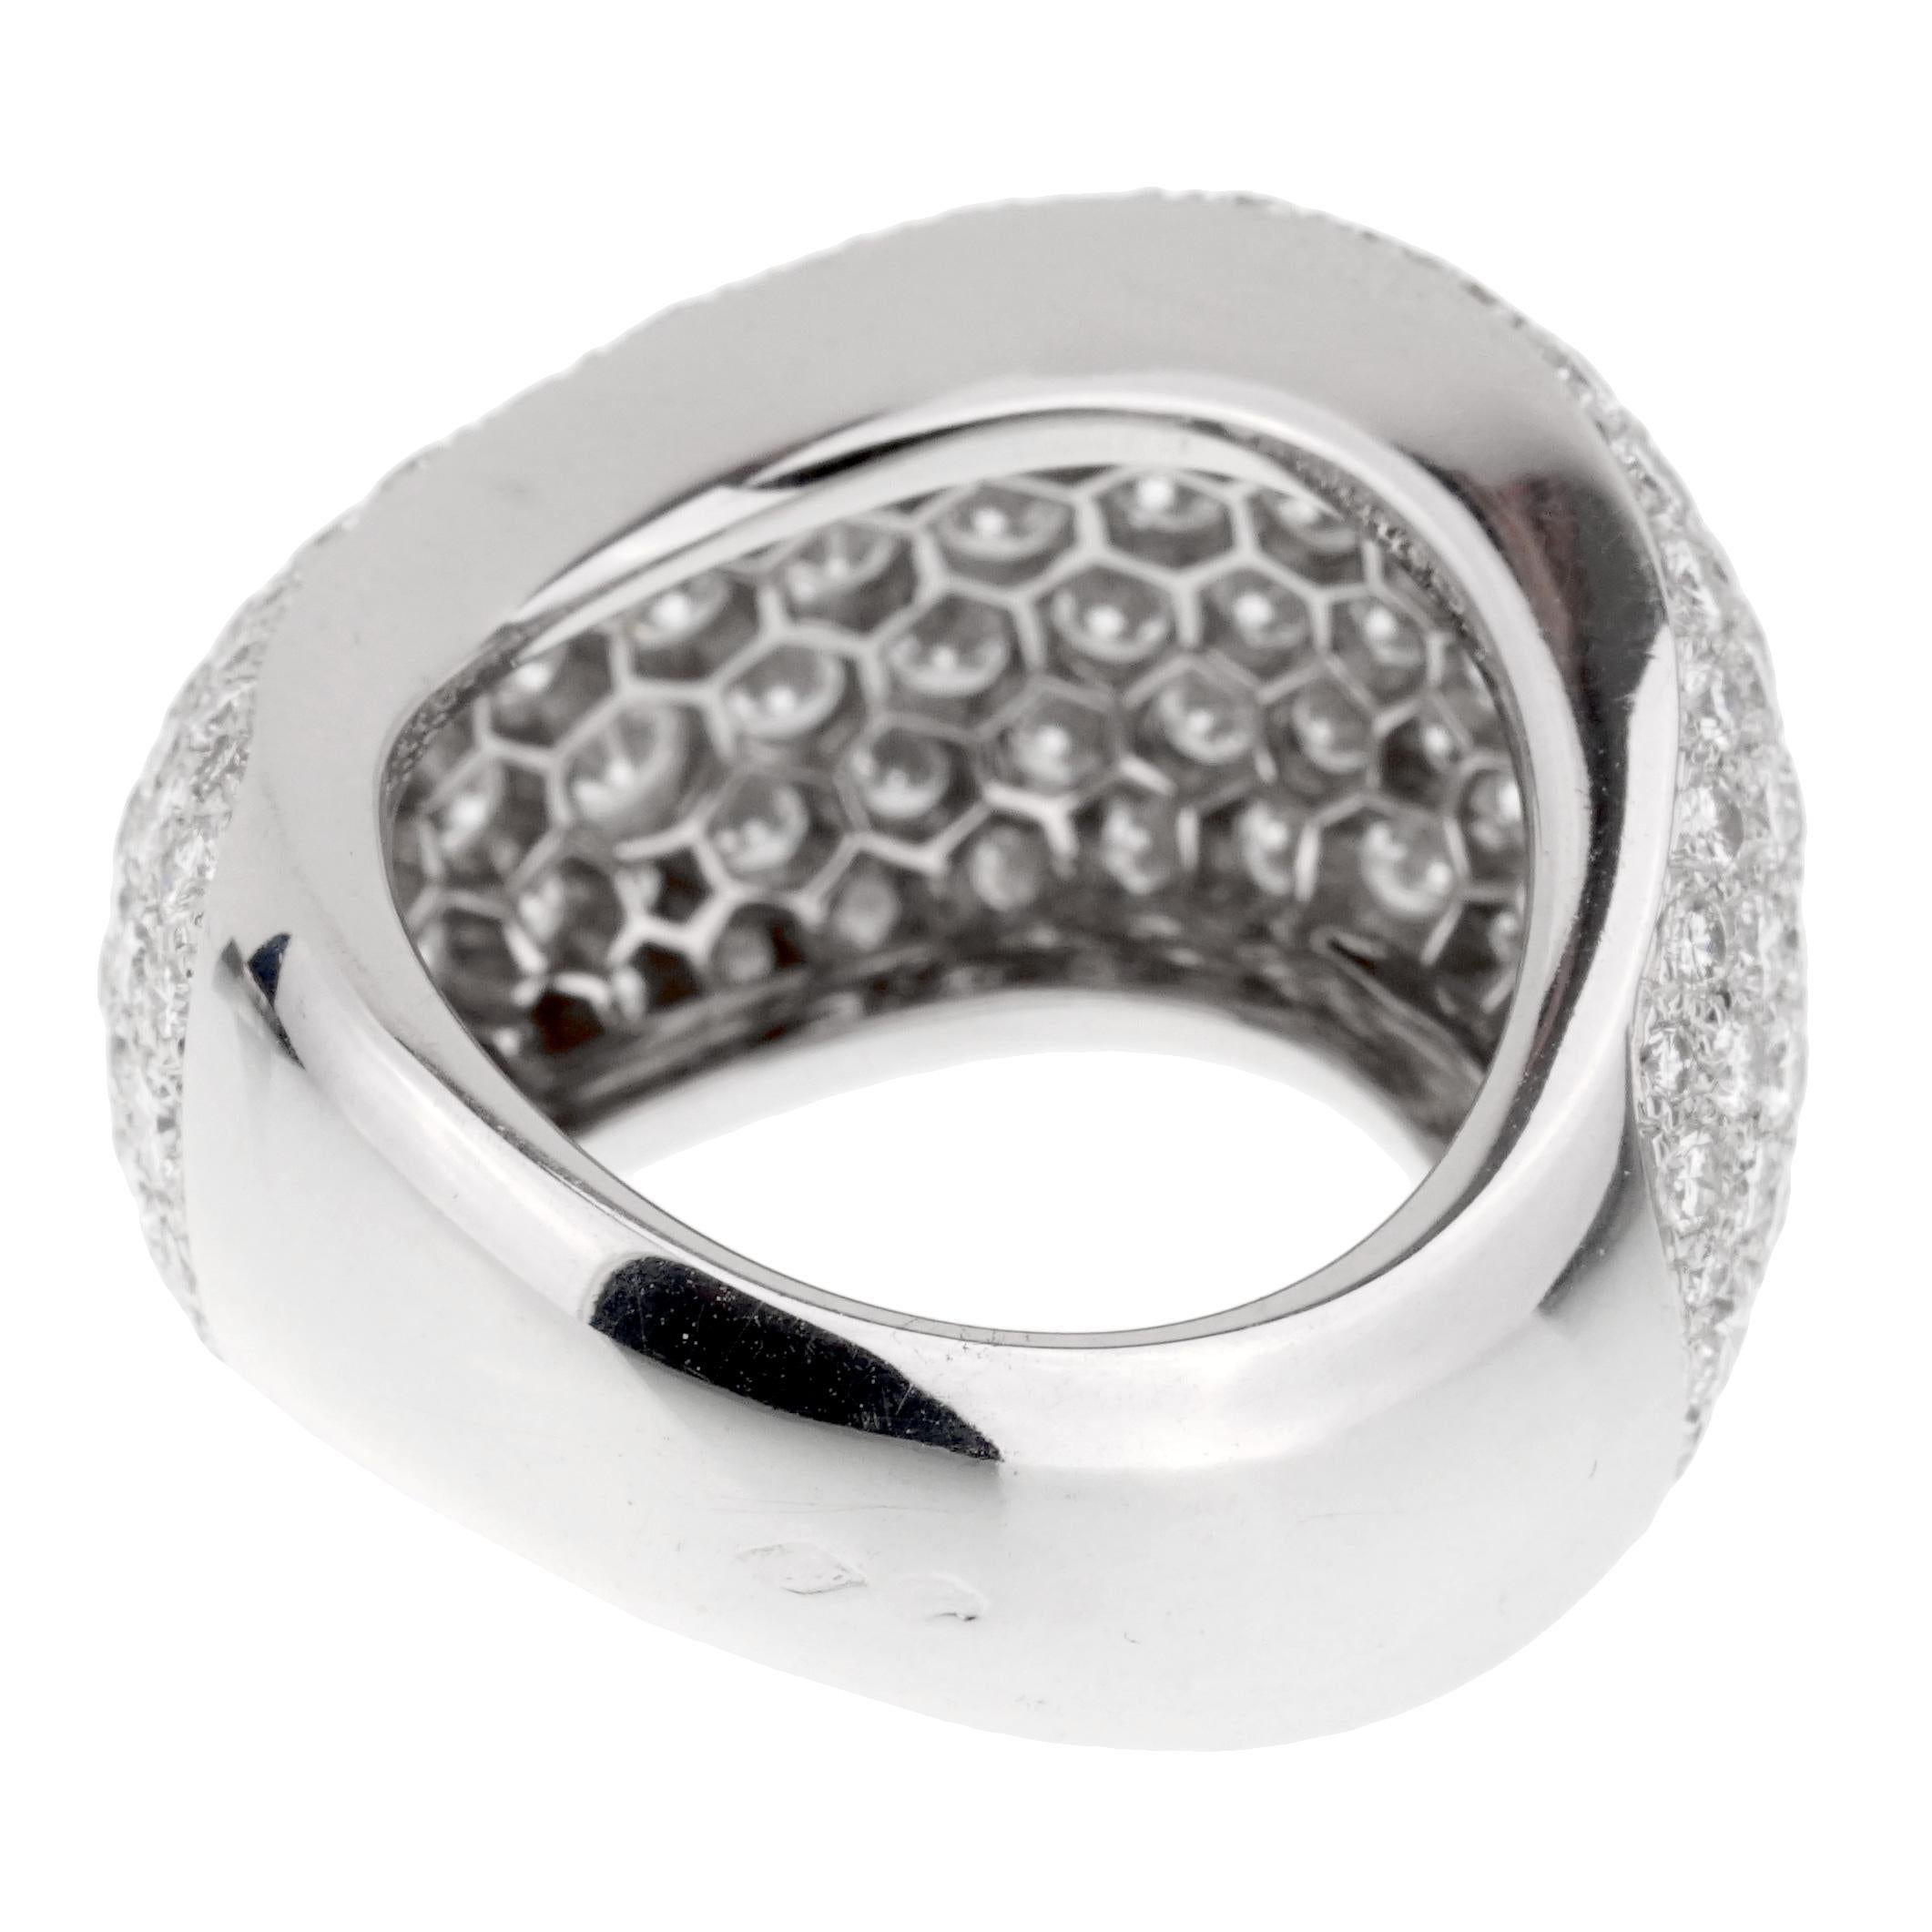 A magnificent authentic Cartier cocktail ring featuring a slightly swirled design set with the finest Cartier round brilliant cut diamonds (5cts appx) in 18k white gold. Size: US 6 Ring Width: .59″ Inches wide
